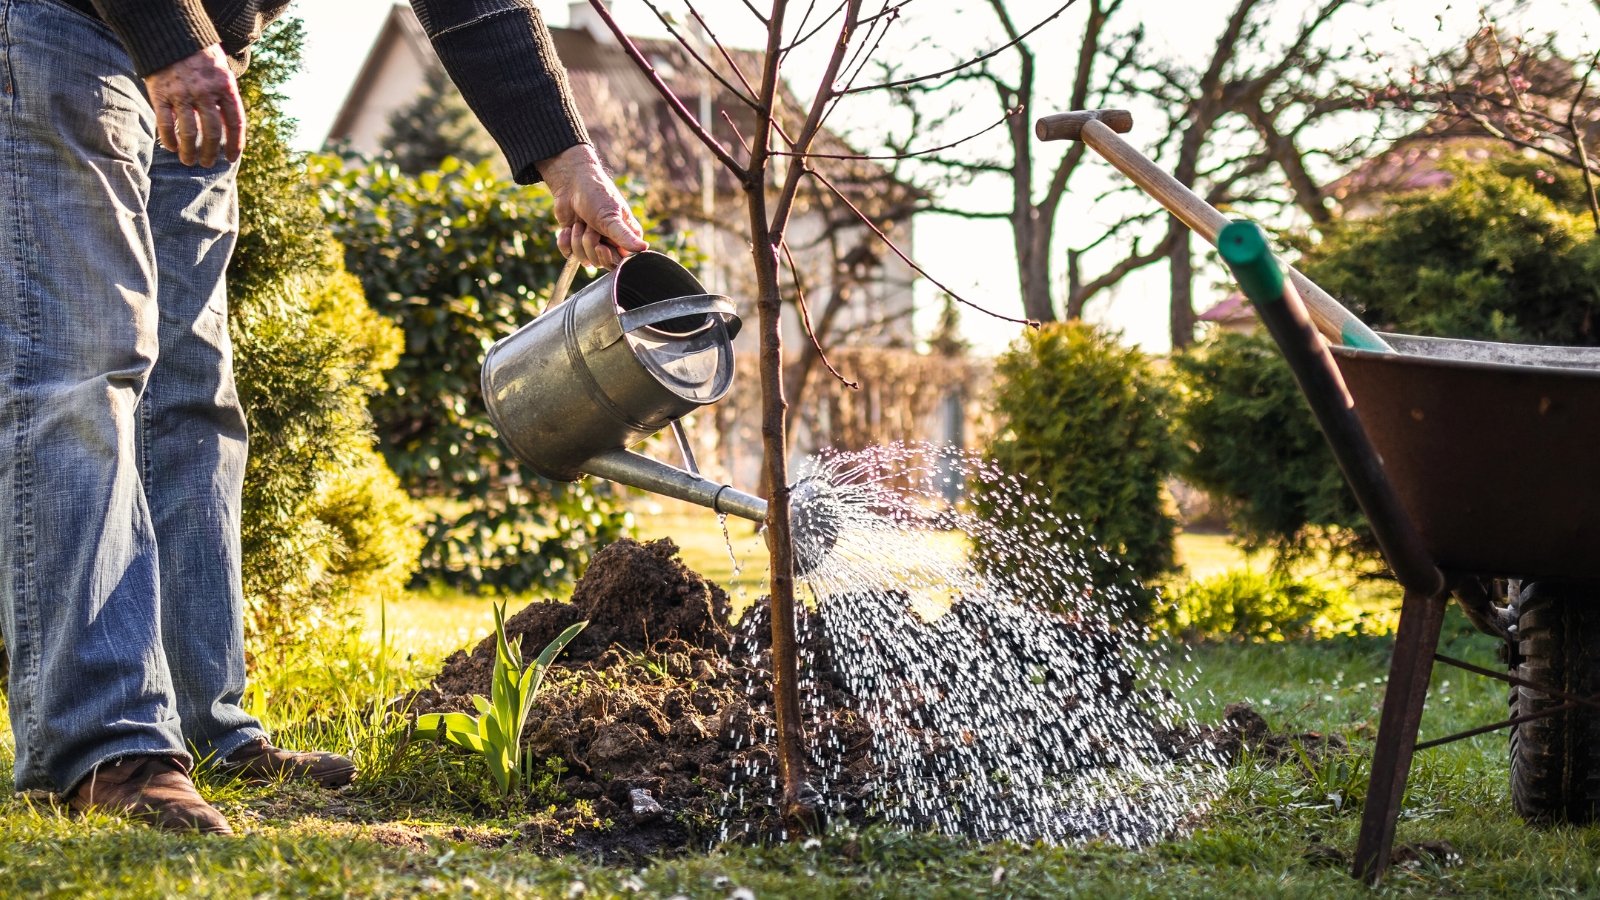 Close-up of a gardener dressed in jeans and a brown sweater watering a young, freshly planted fruit tree with a large metal watering can in a sunny garden.